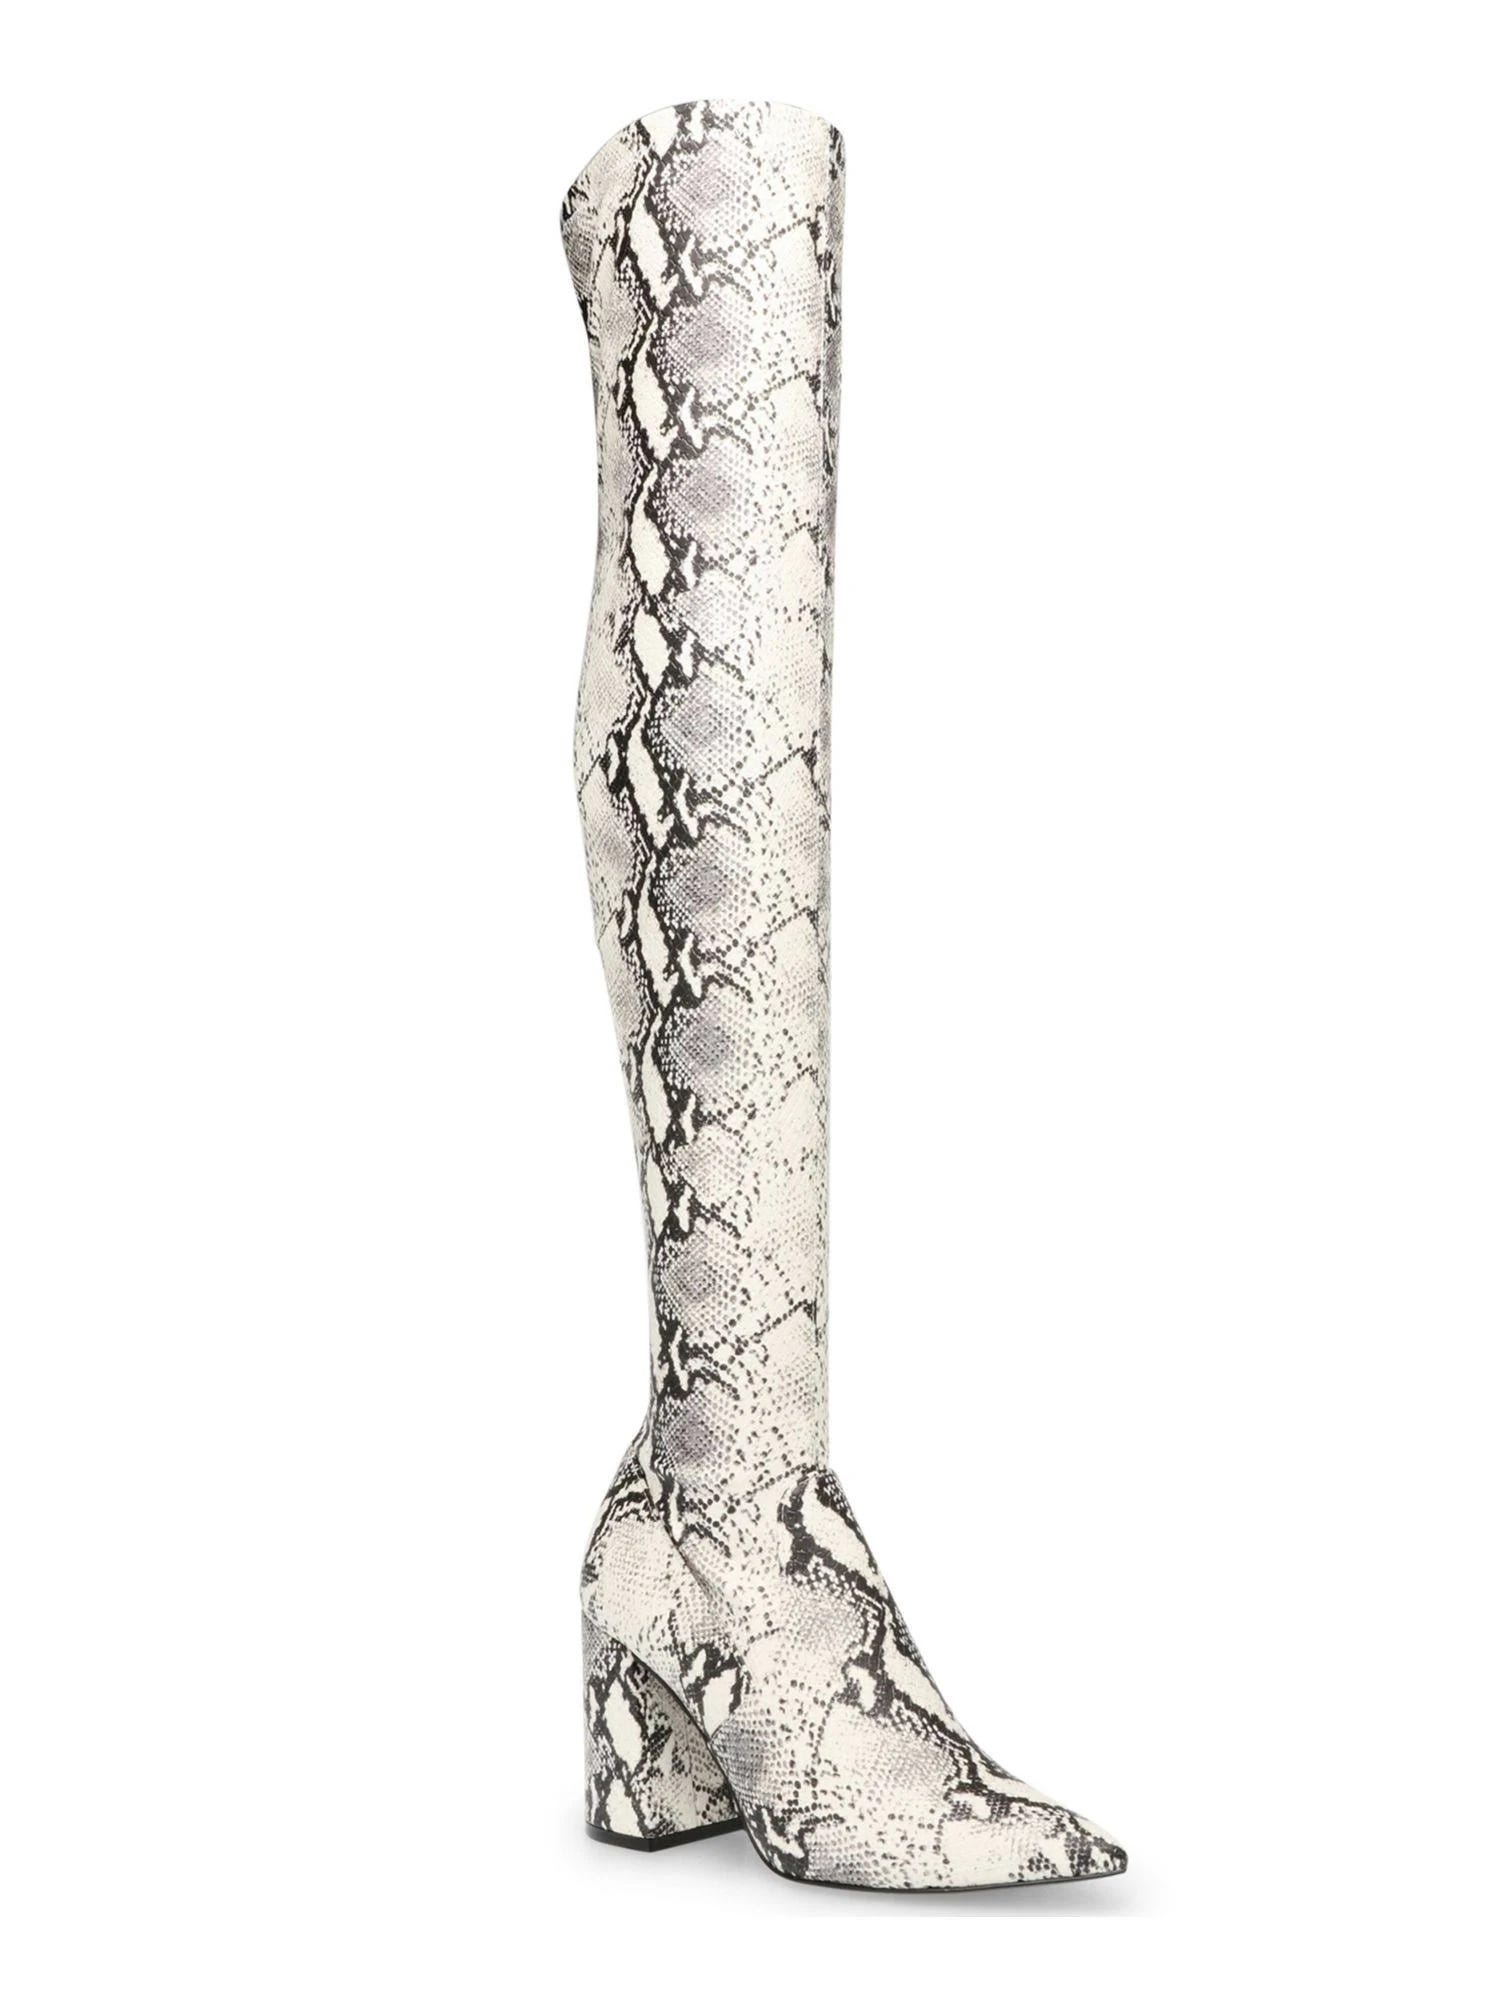 Steve Madden - Styles Jacoby Snakeskin Thigh-High Boots | Image